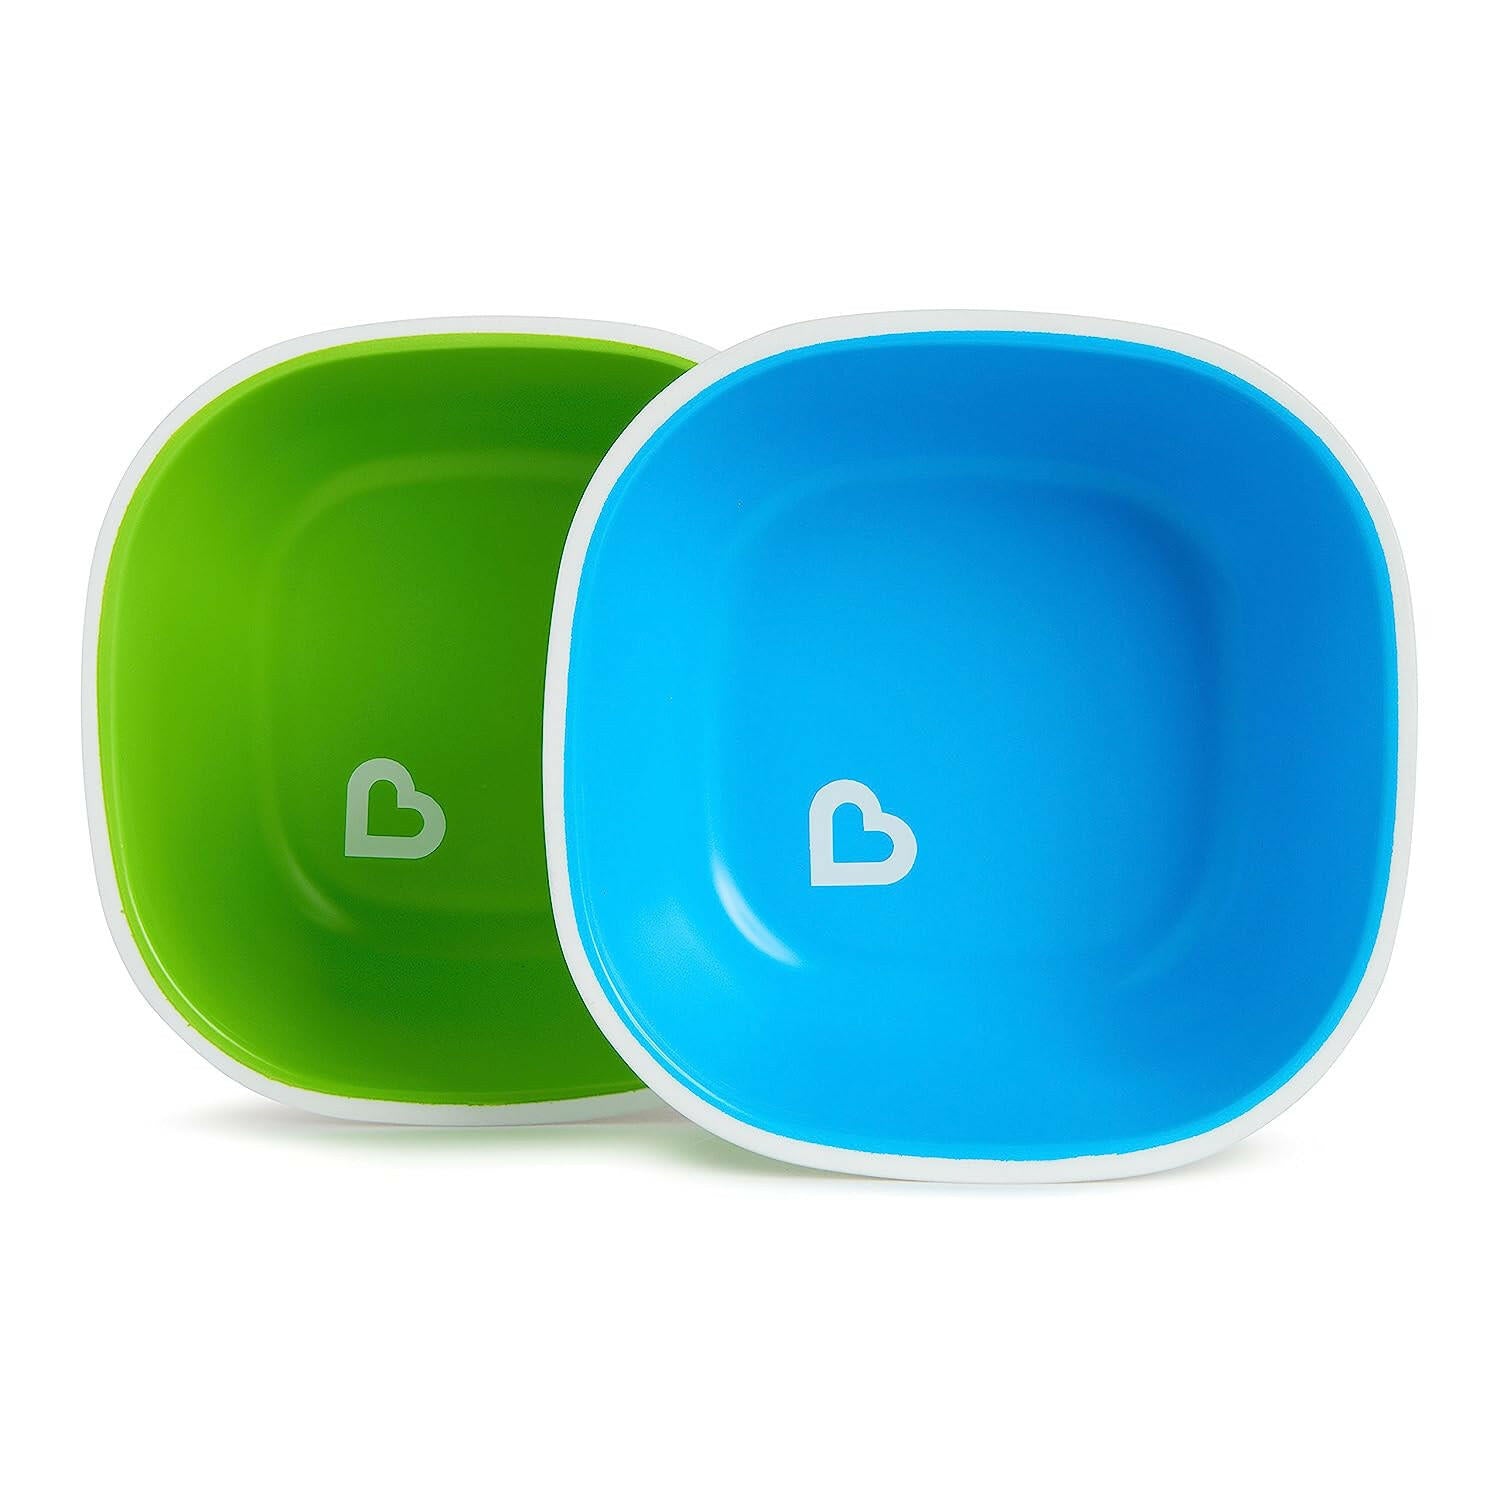 Munchkin Splash 4 Piece Toddler Divided Plate and Bowl Dining Set, Blue/Green.